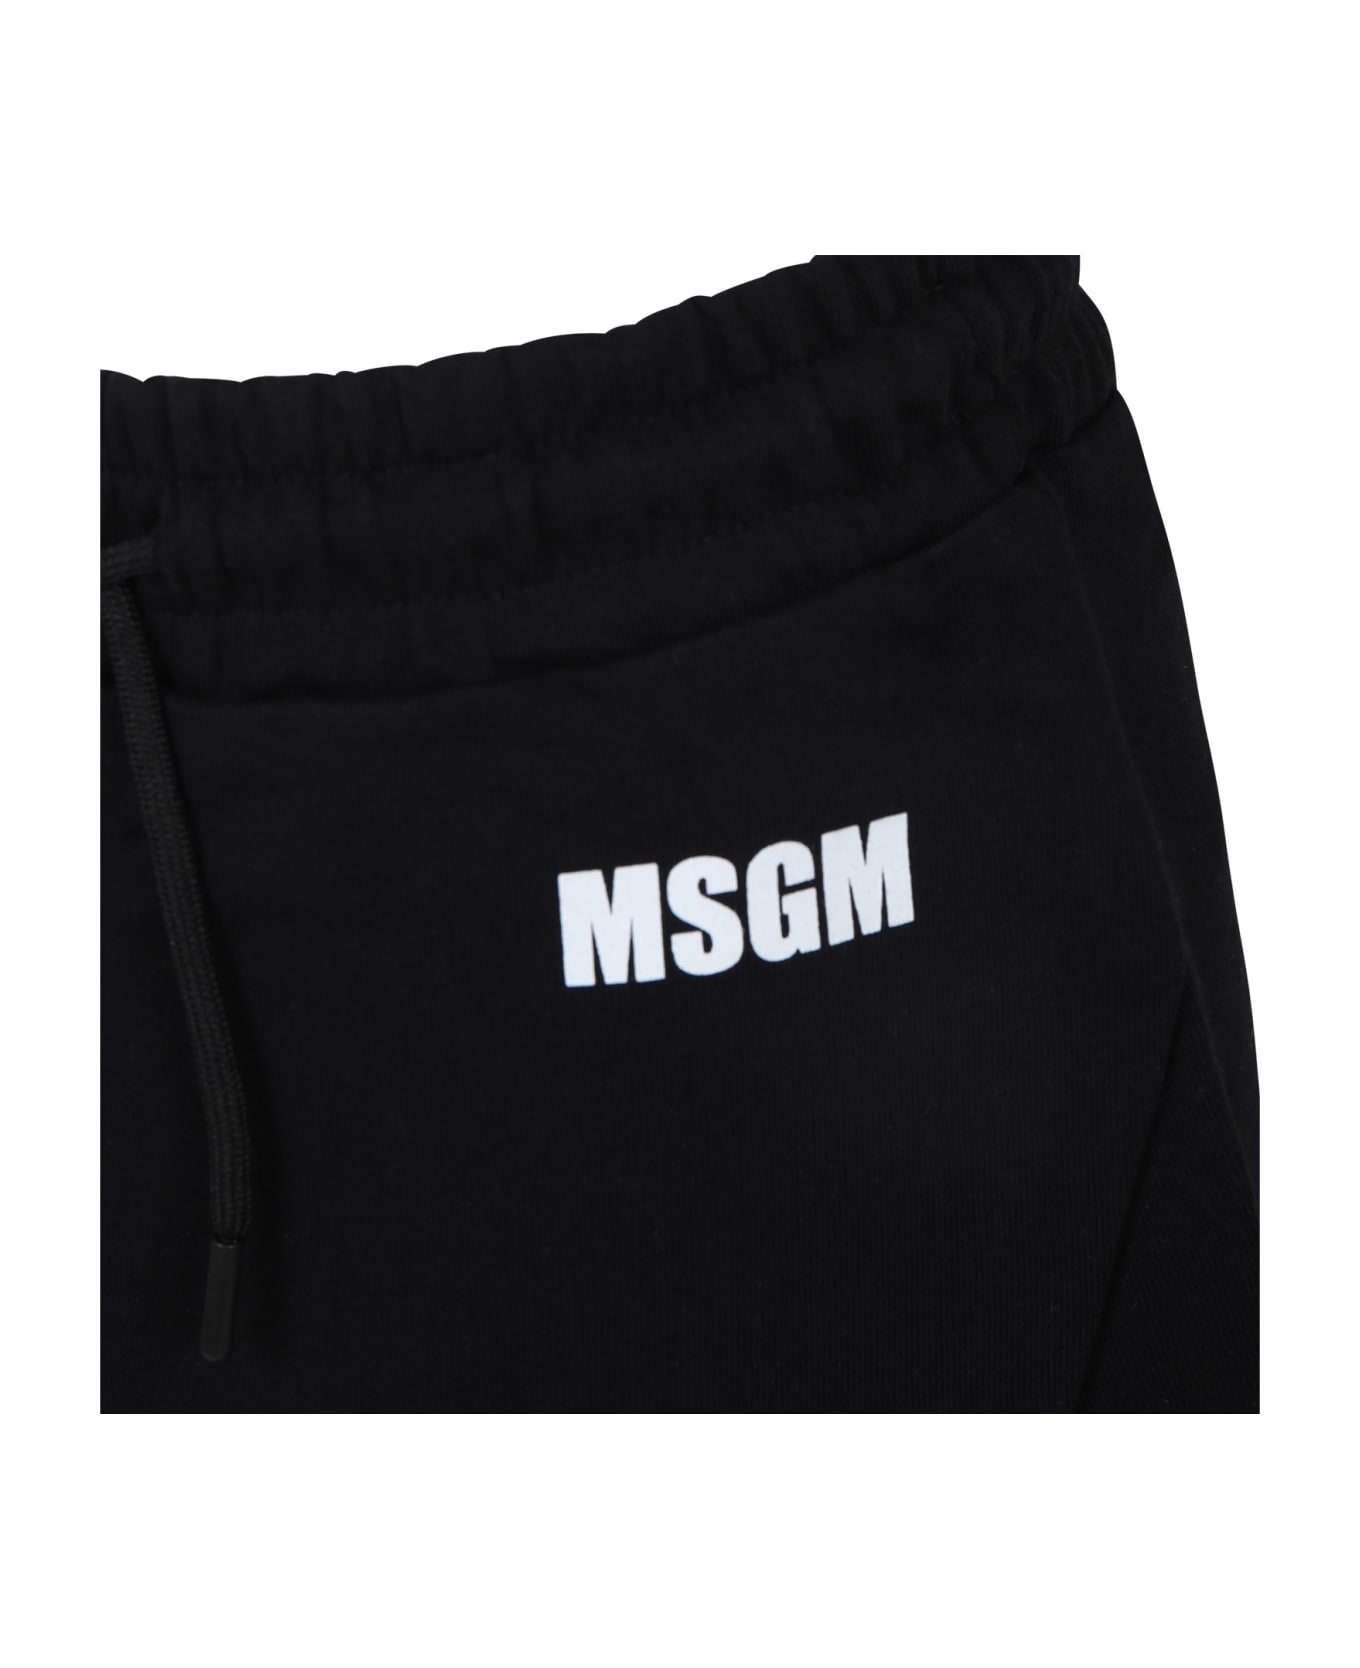 MSGM Black Skirt For Girl With Logo And Writing - Black